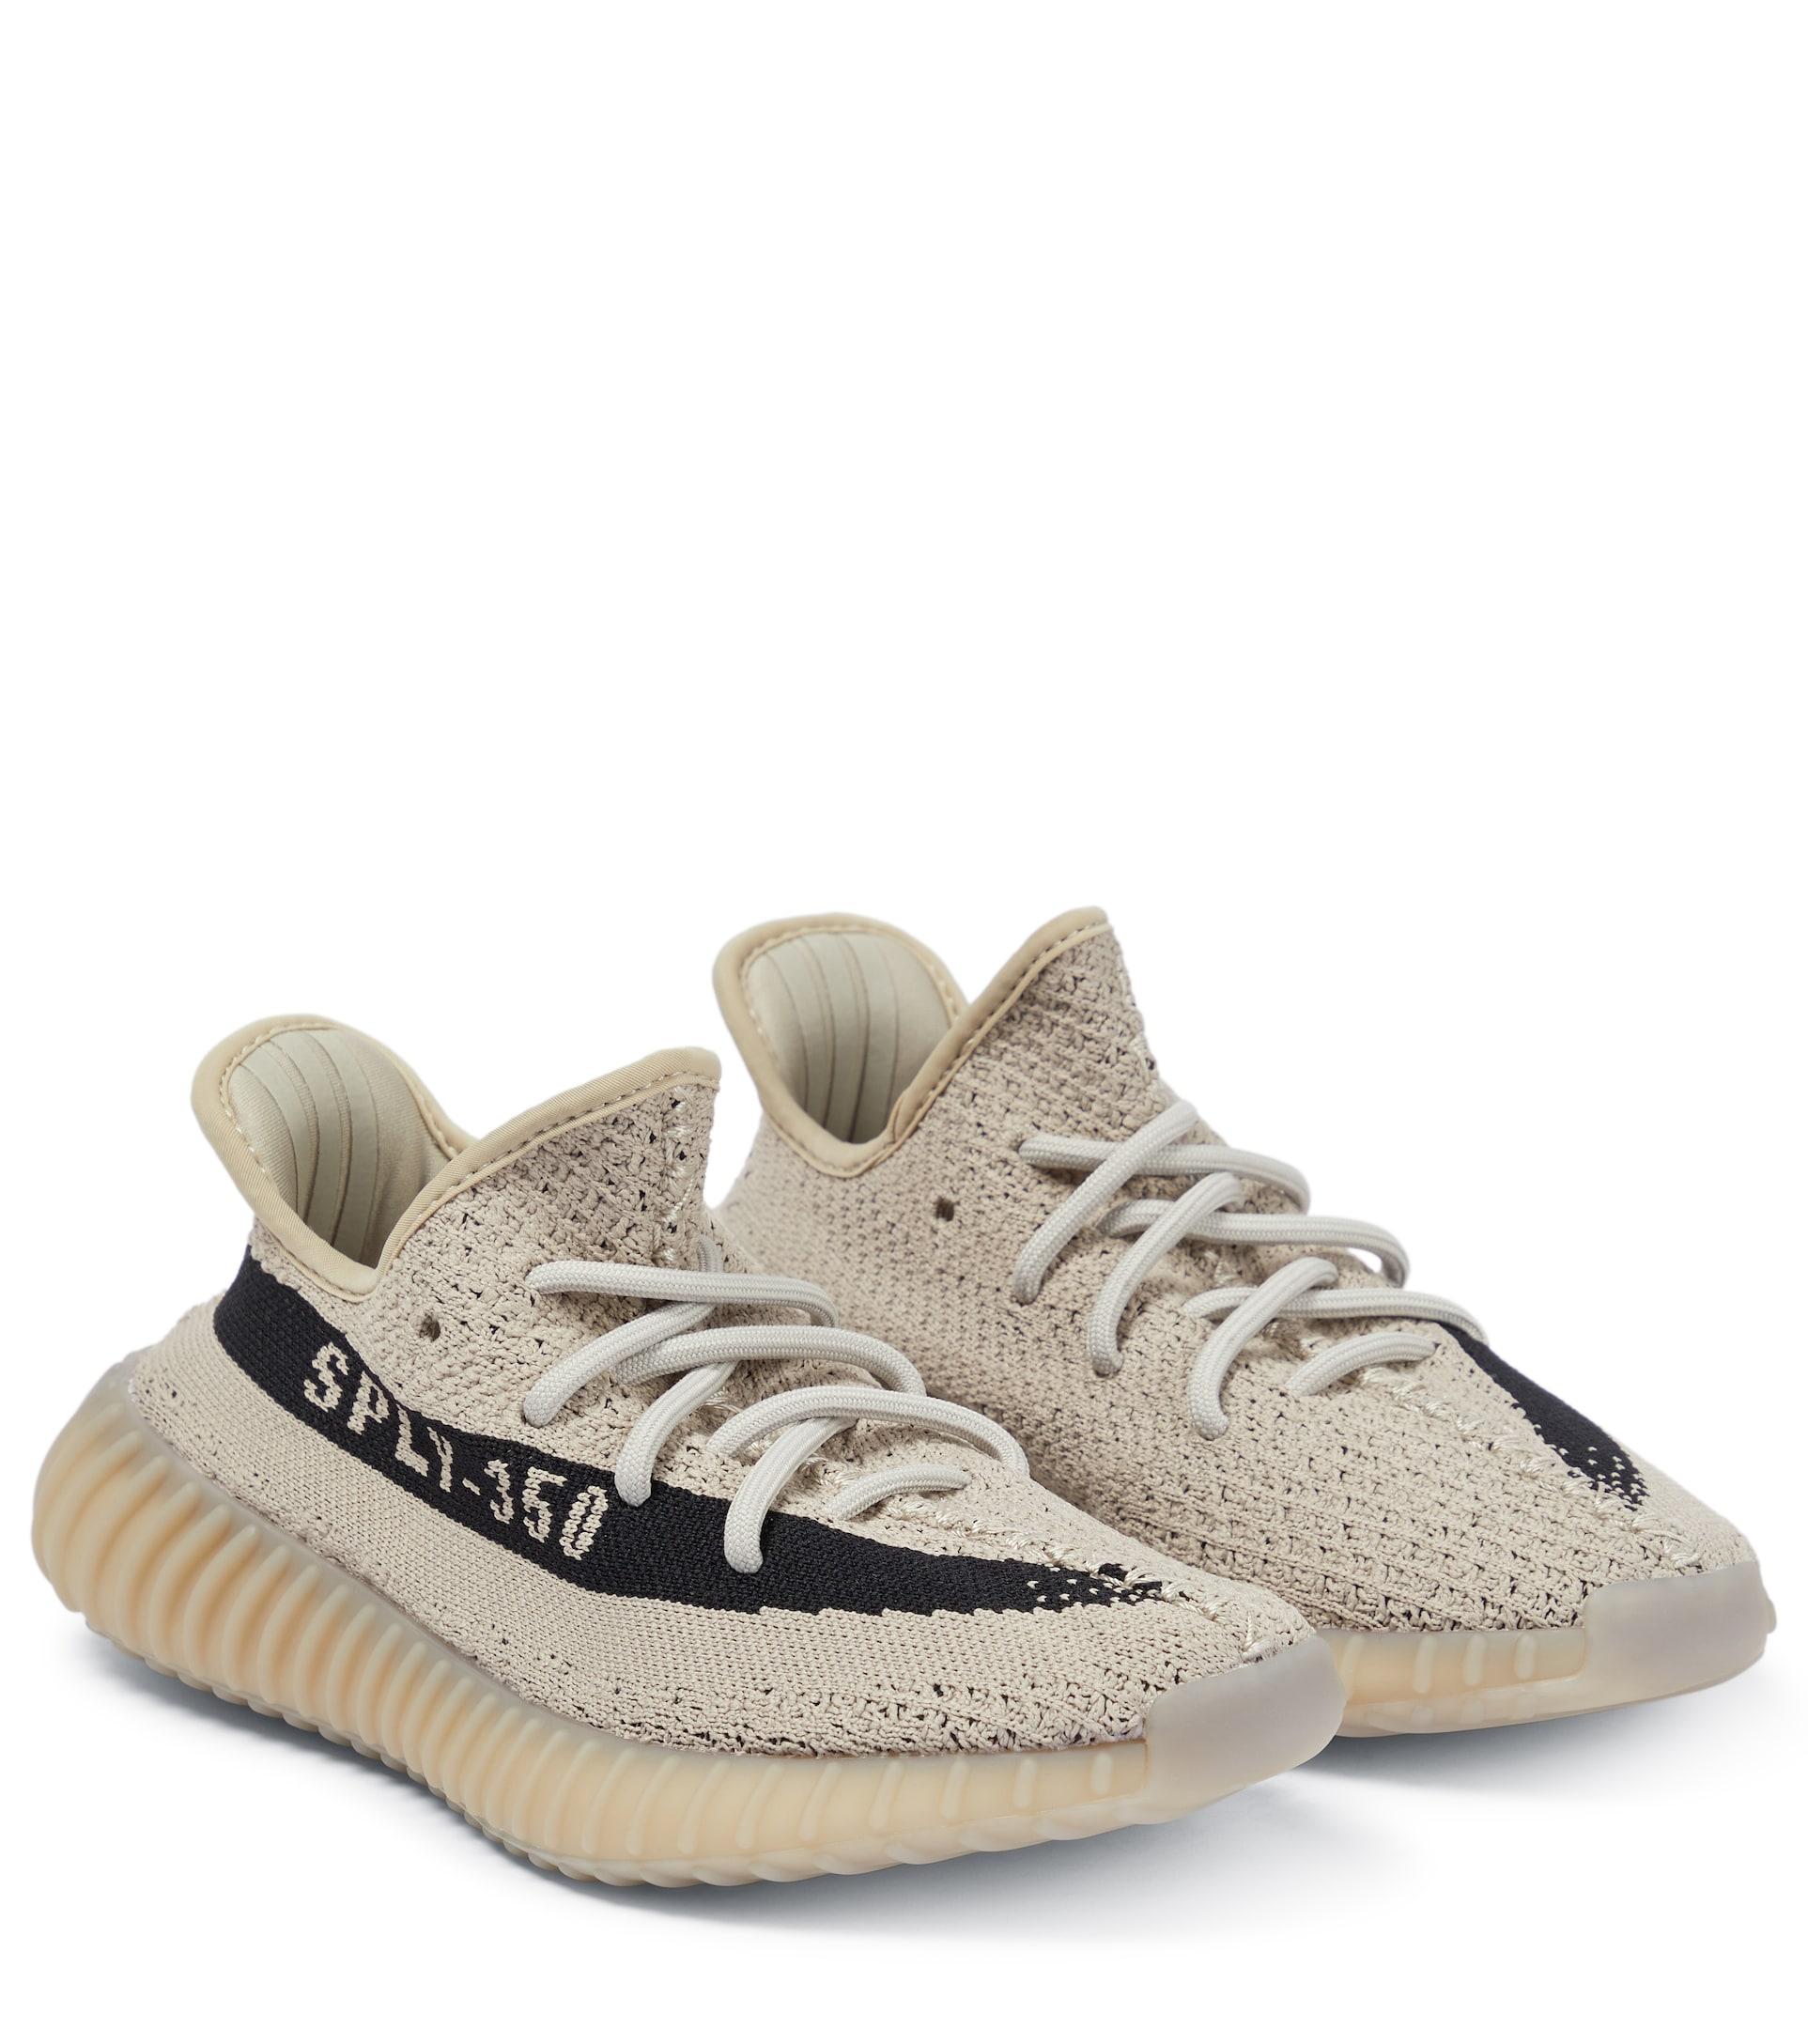 adidas Yeezy Boost 350 V2 Sneakers | Lyst